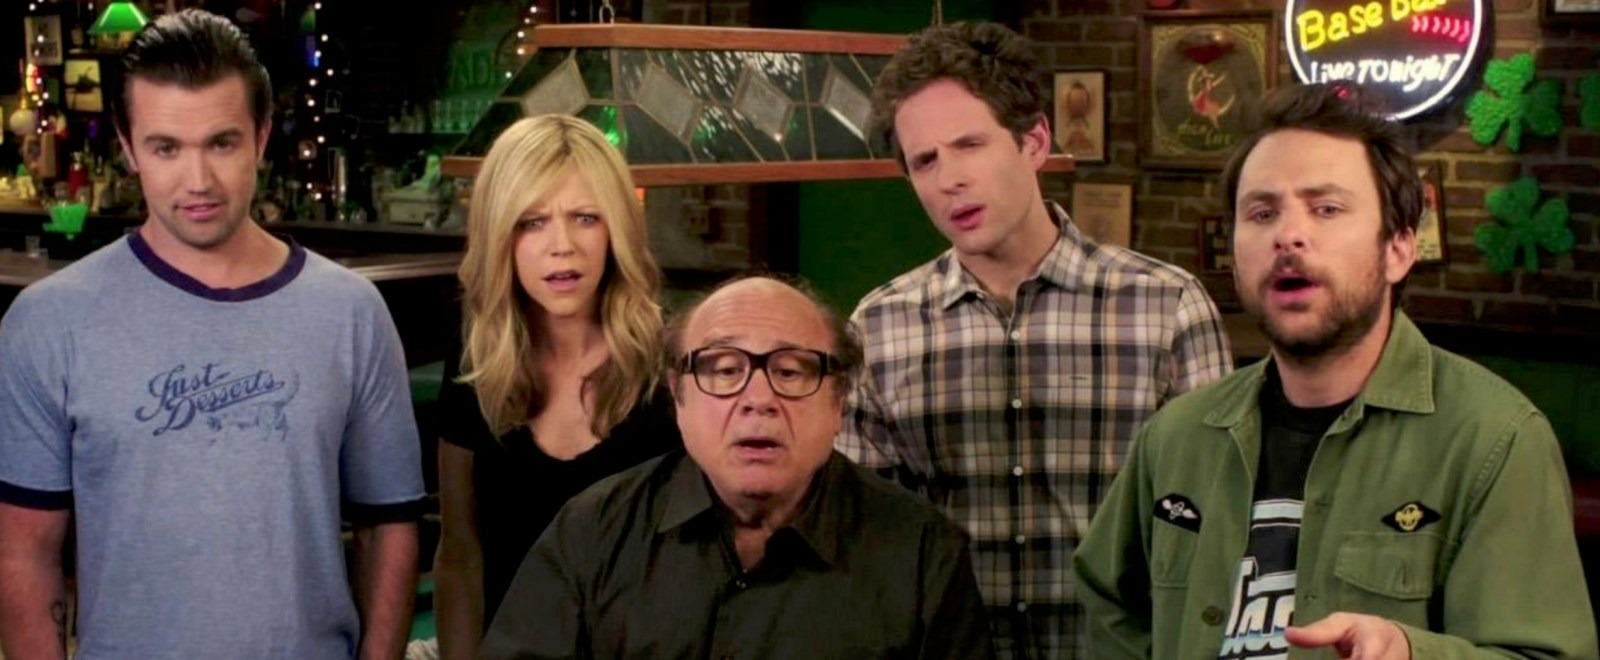 #It’s Always Sunny in Philadelphia: Stars of FXX Comedy Have Had the Series Finale Planned for 10 Years